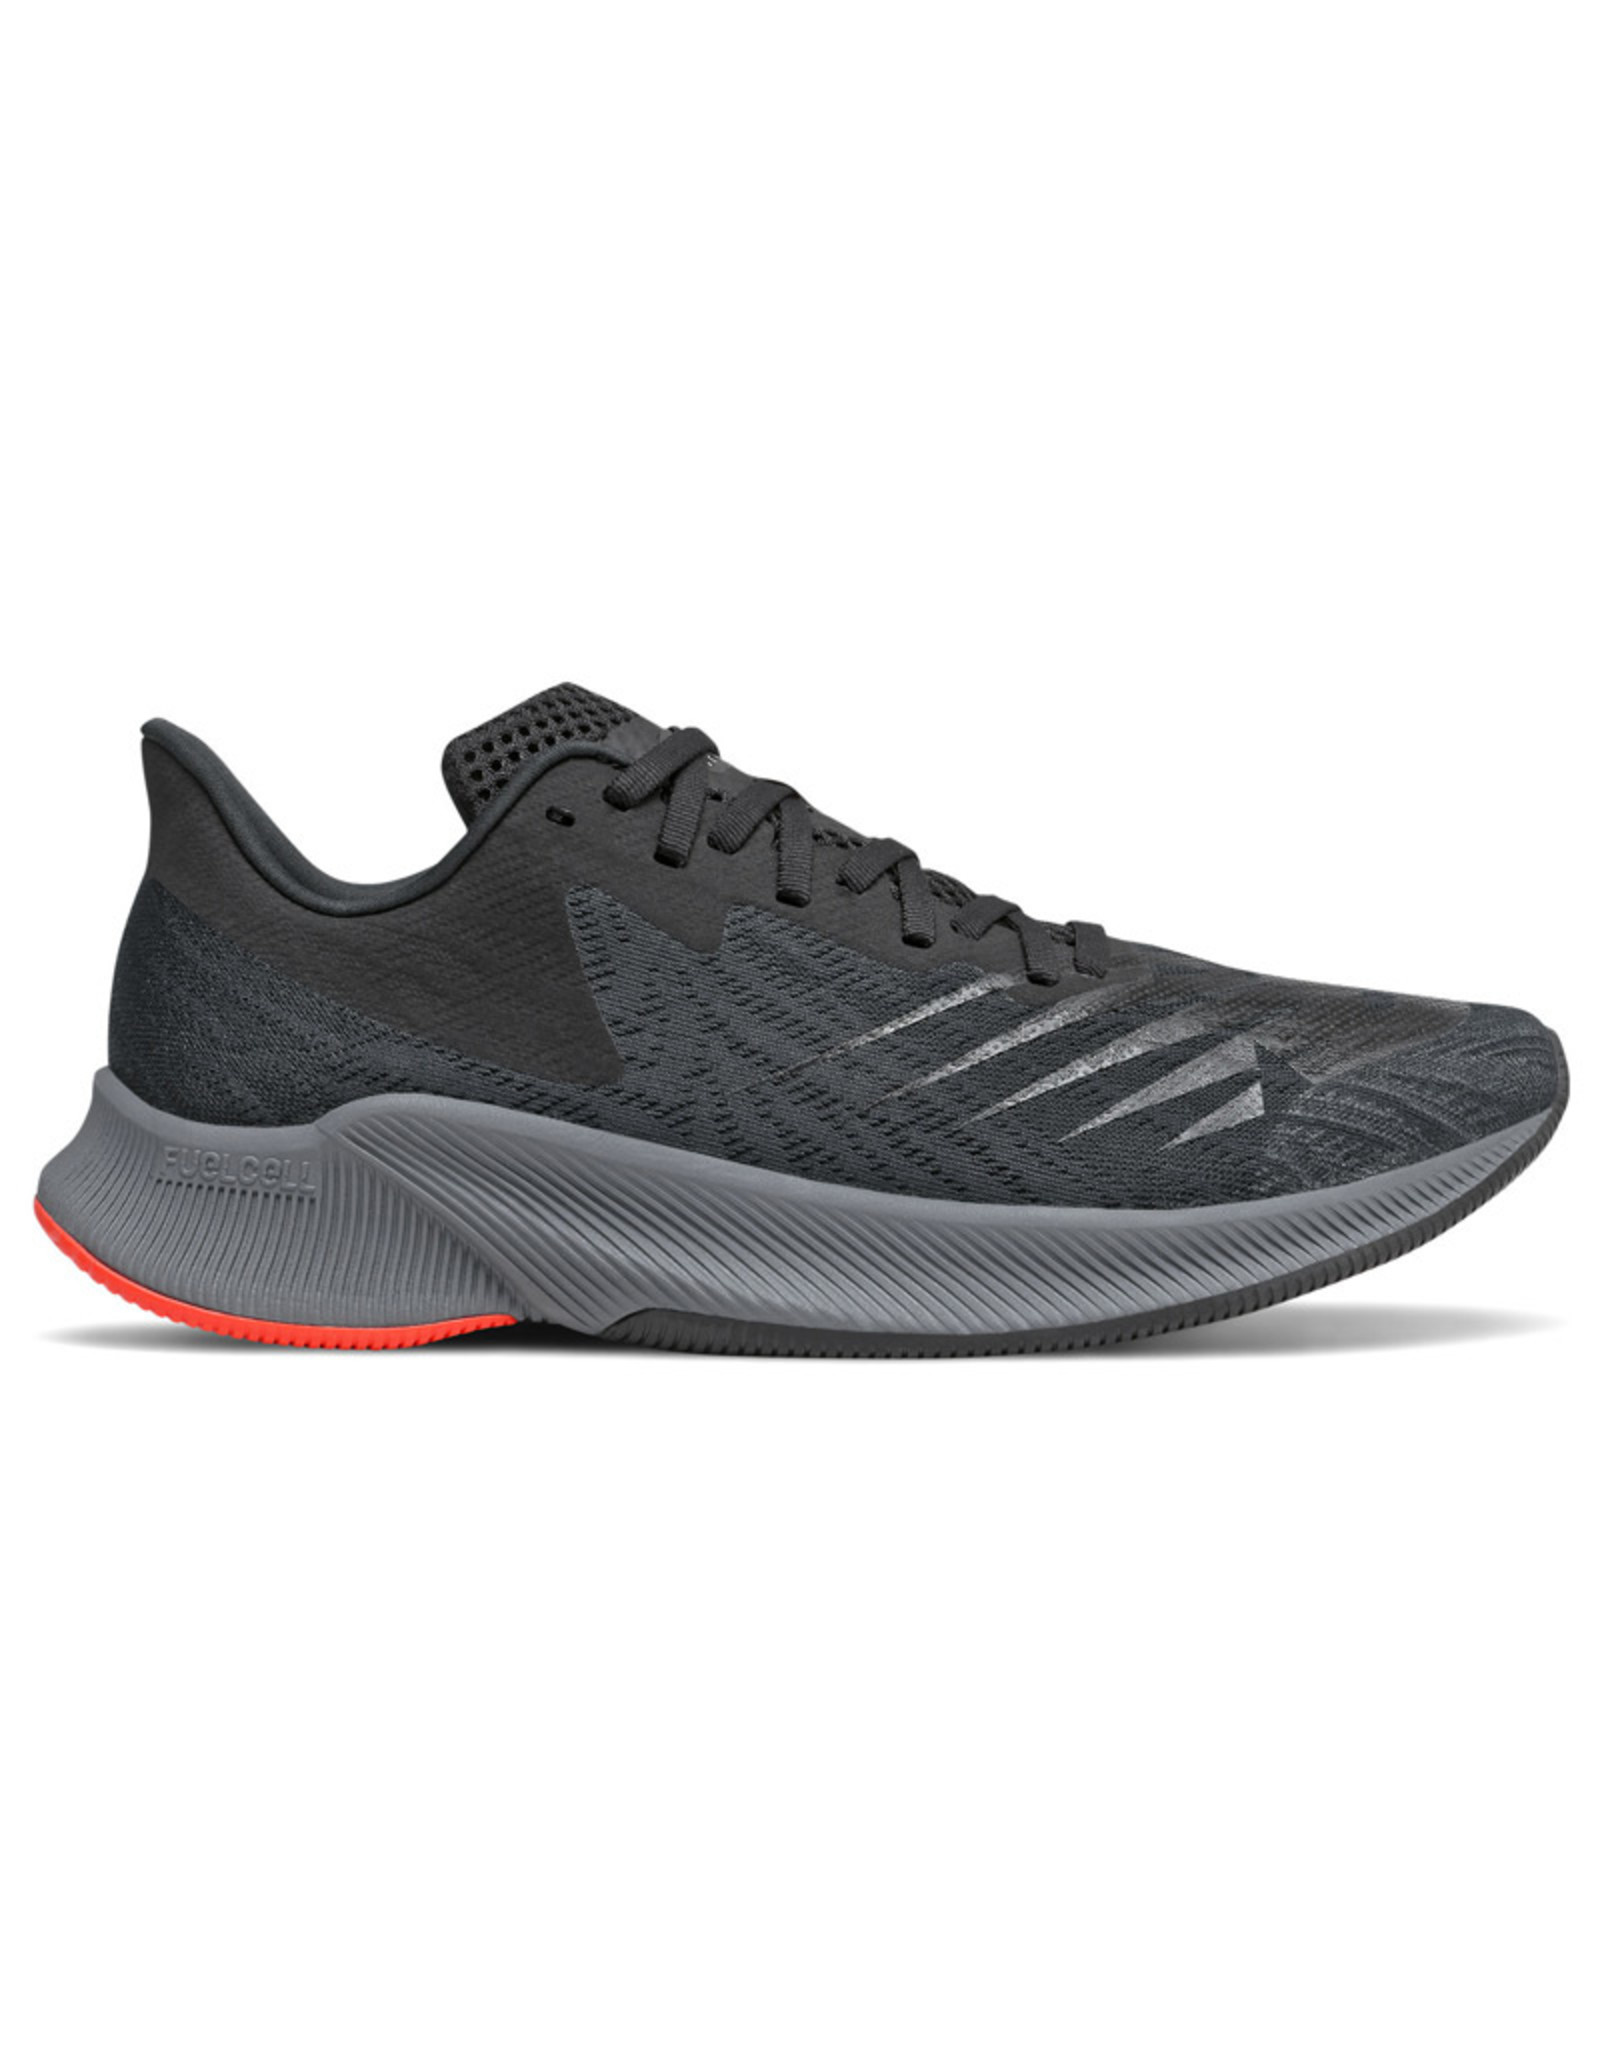 New Balance Men's Fuel Cell Prism